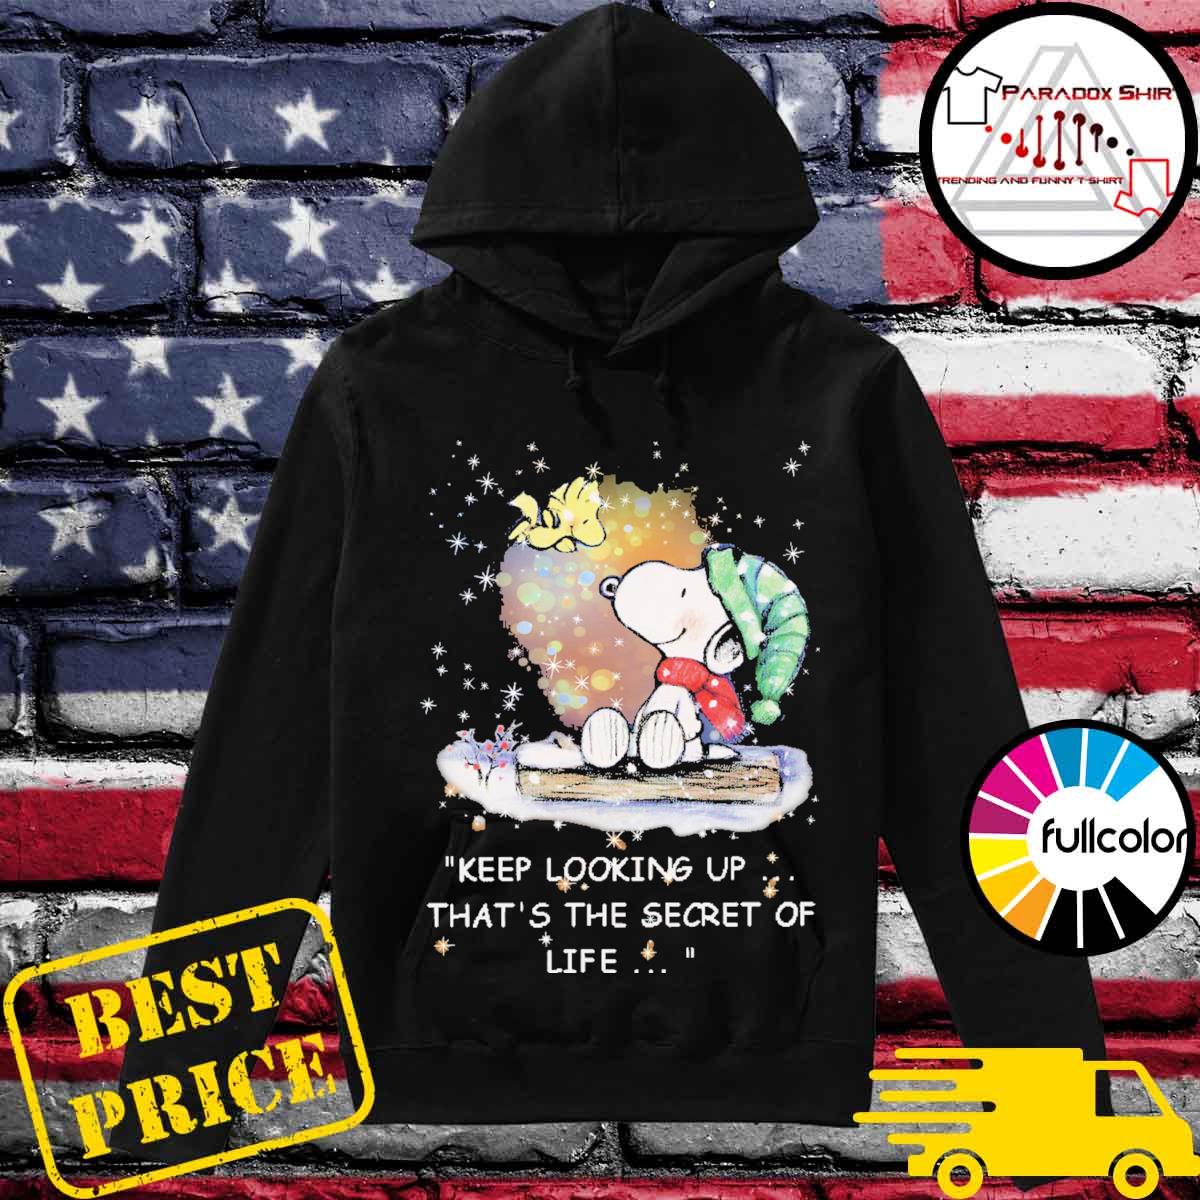 Snoopy And Woodstock Keep Looking Up That S The Secret Of Life Shirt Hoodie Sweater Long Sleeve And Tank Top